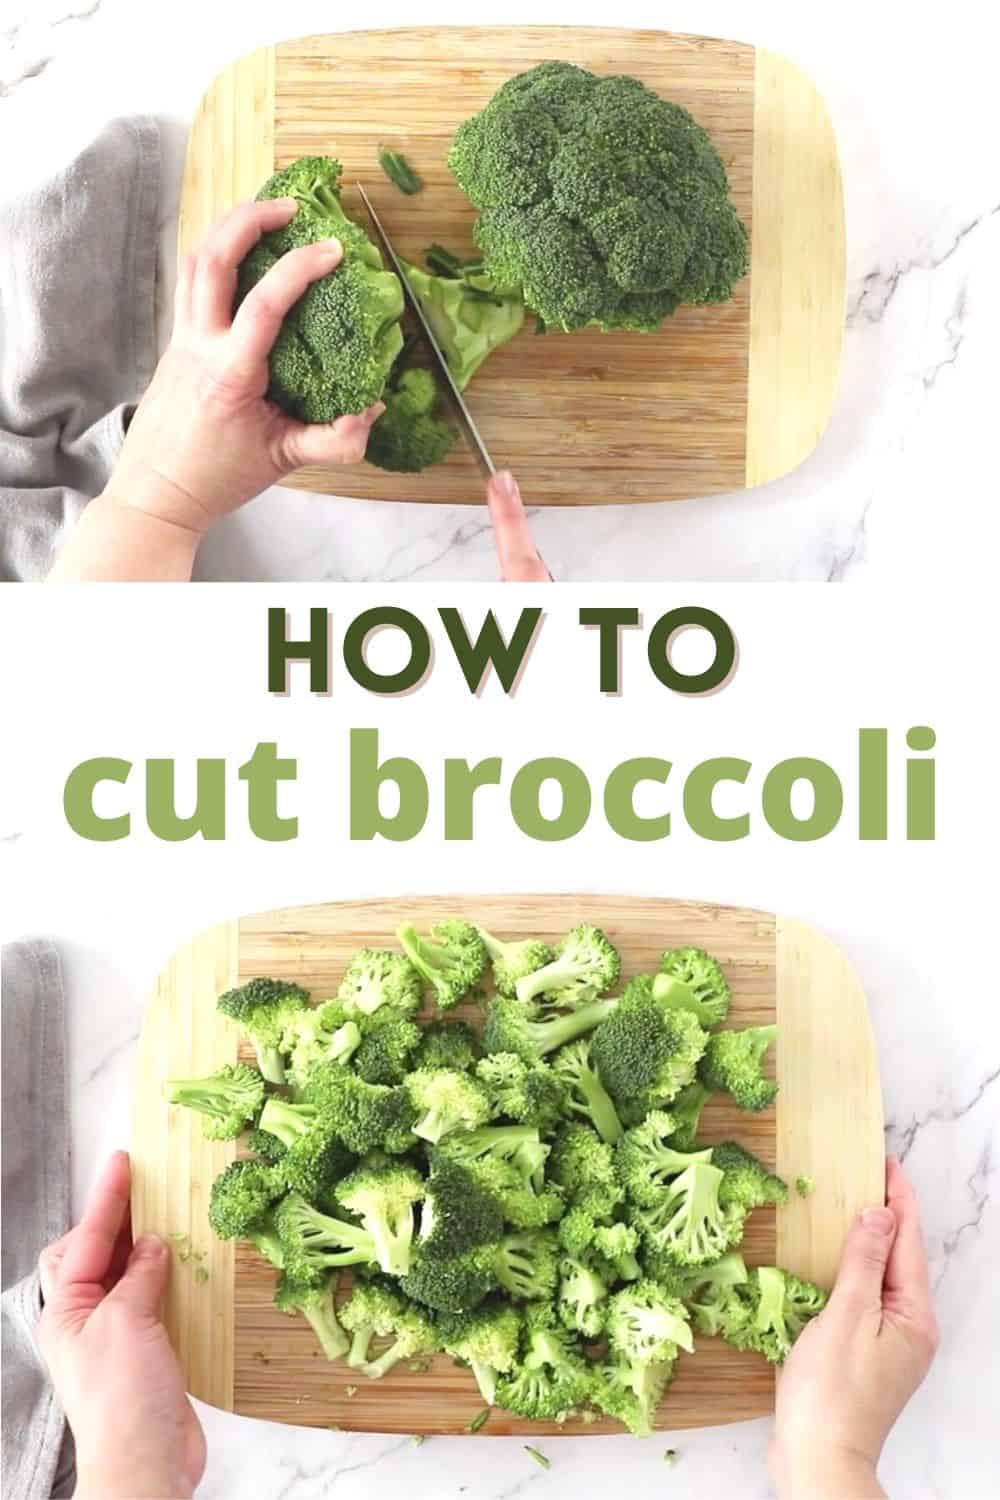 Easy instructions on how to cut broccoli into florets. The best method for cutting broccoli. Use this step by step for your favorite broccoli recipes!